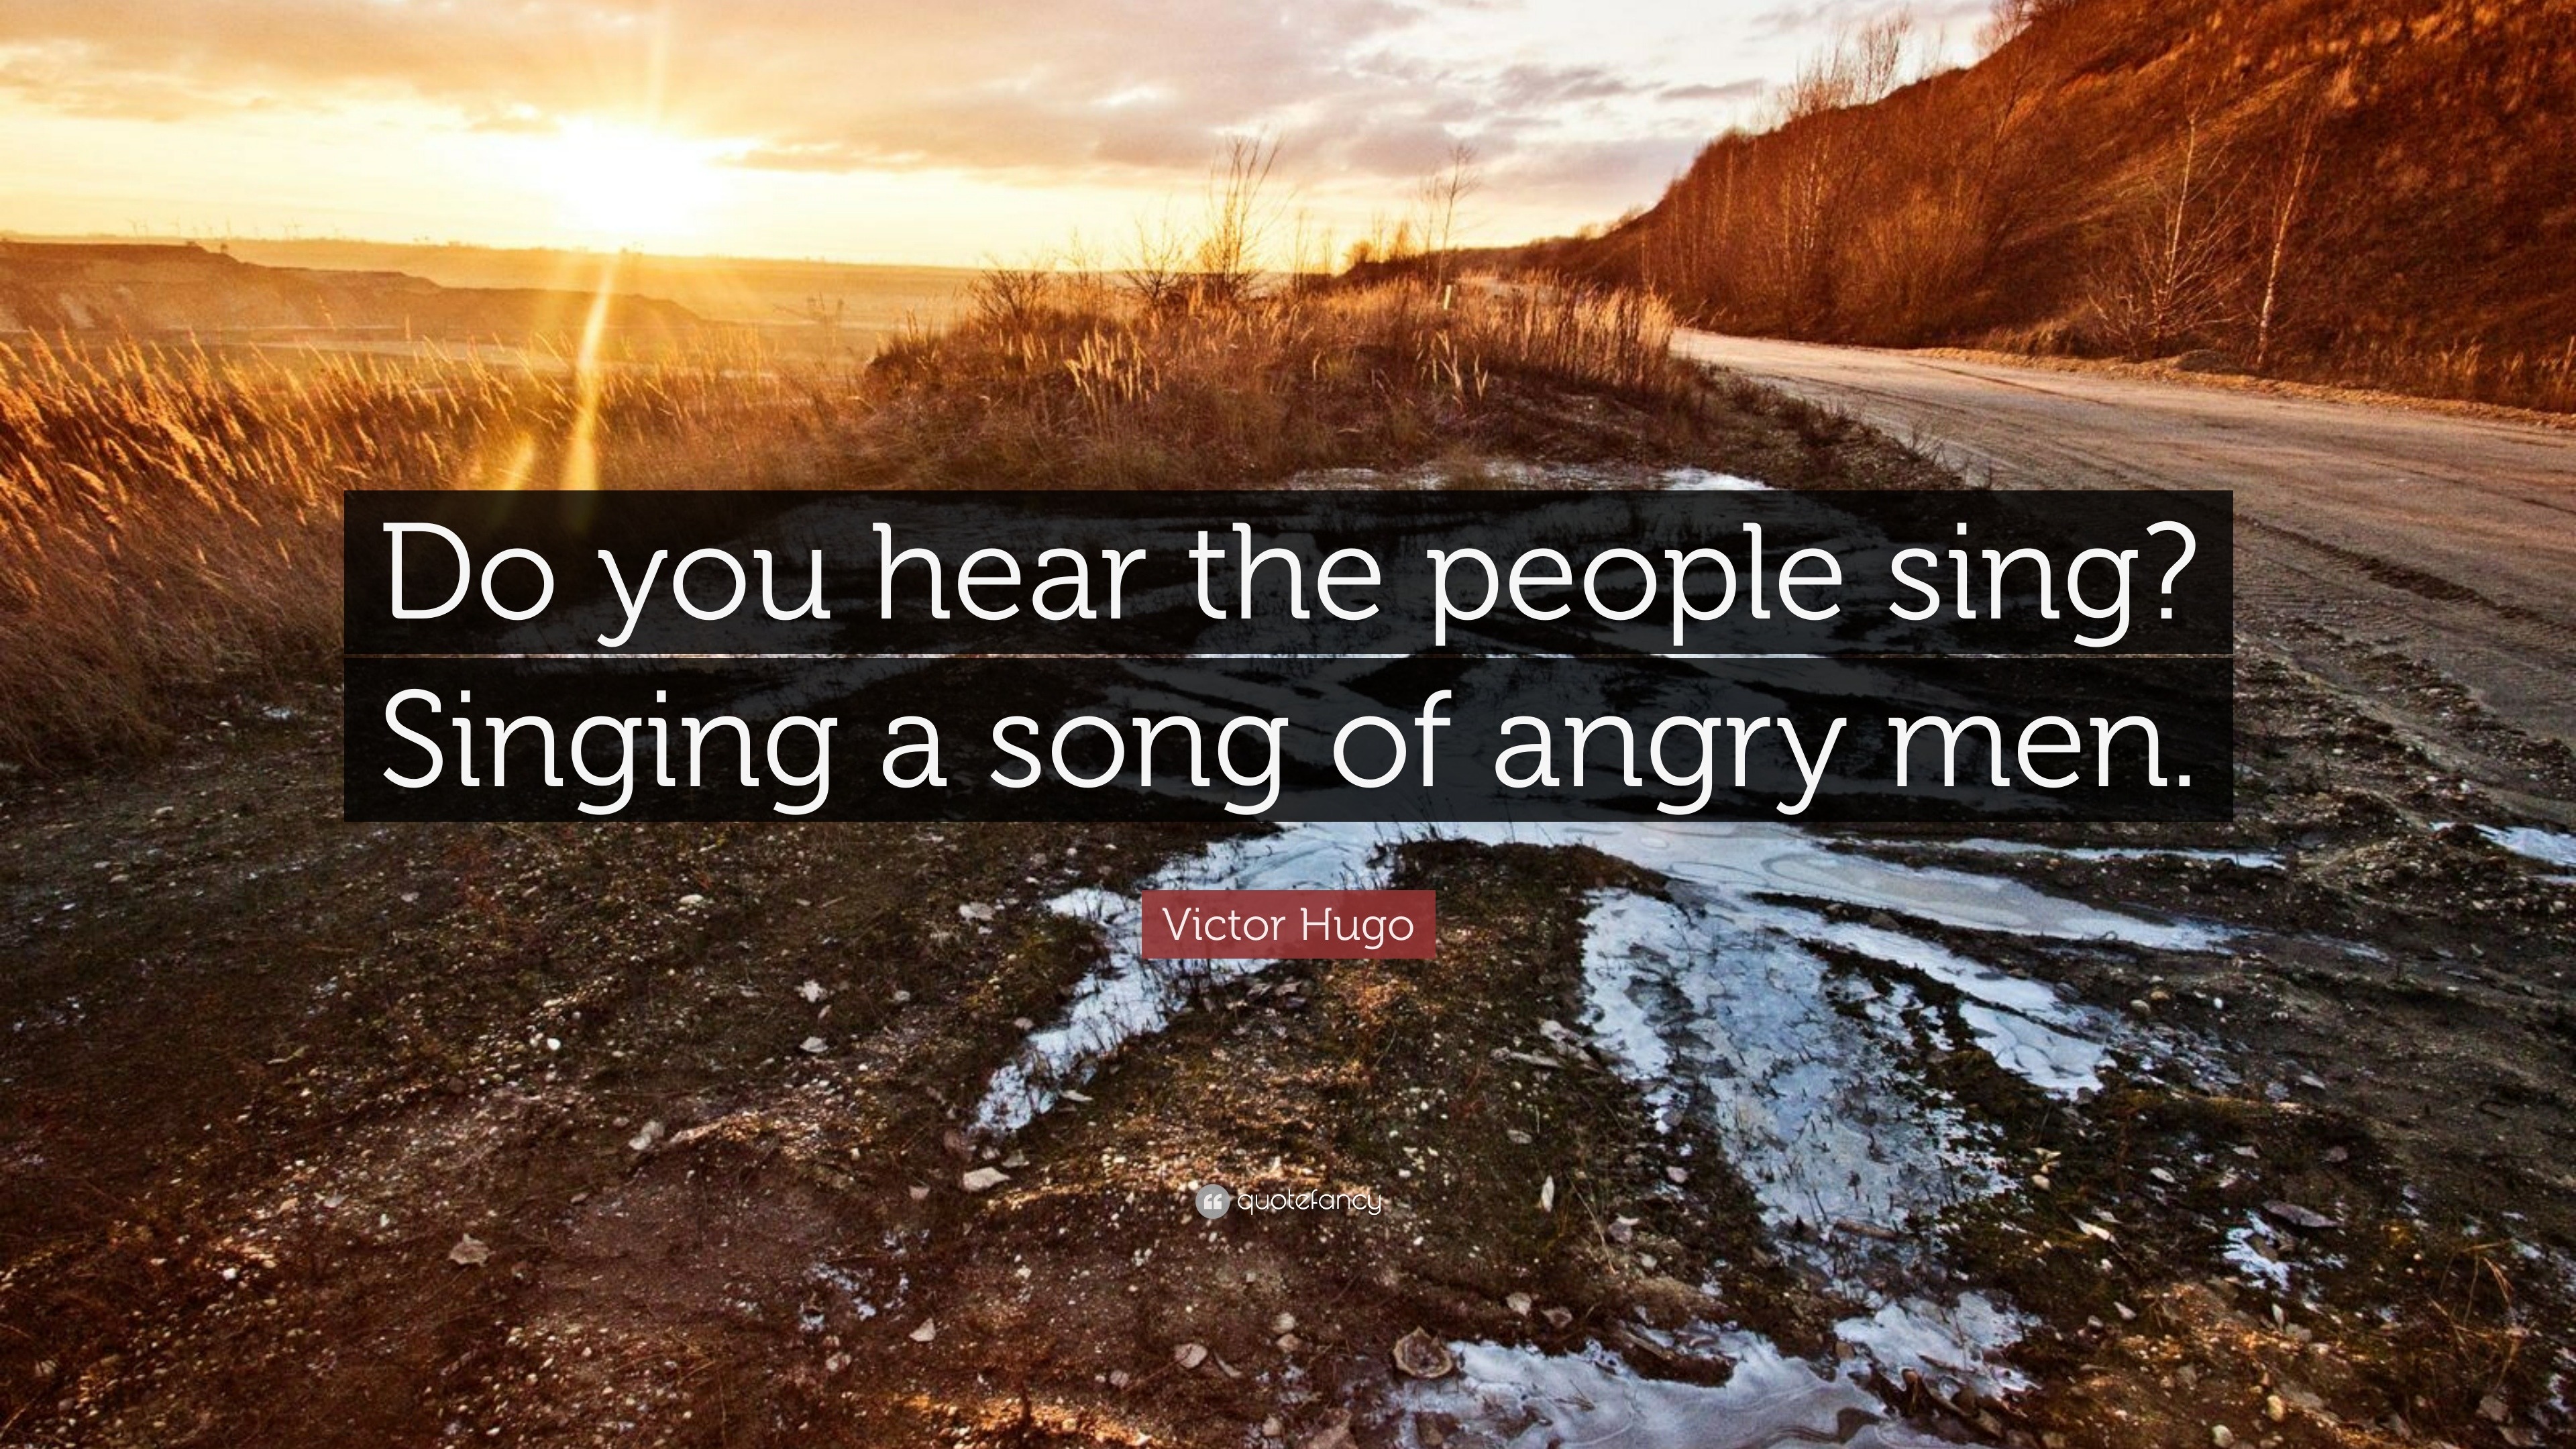 Victor Hugo Quote Do You Hear The People Sing Singing A Song Of Angry Men 7 Wallpapers Quotefancy